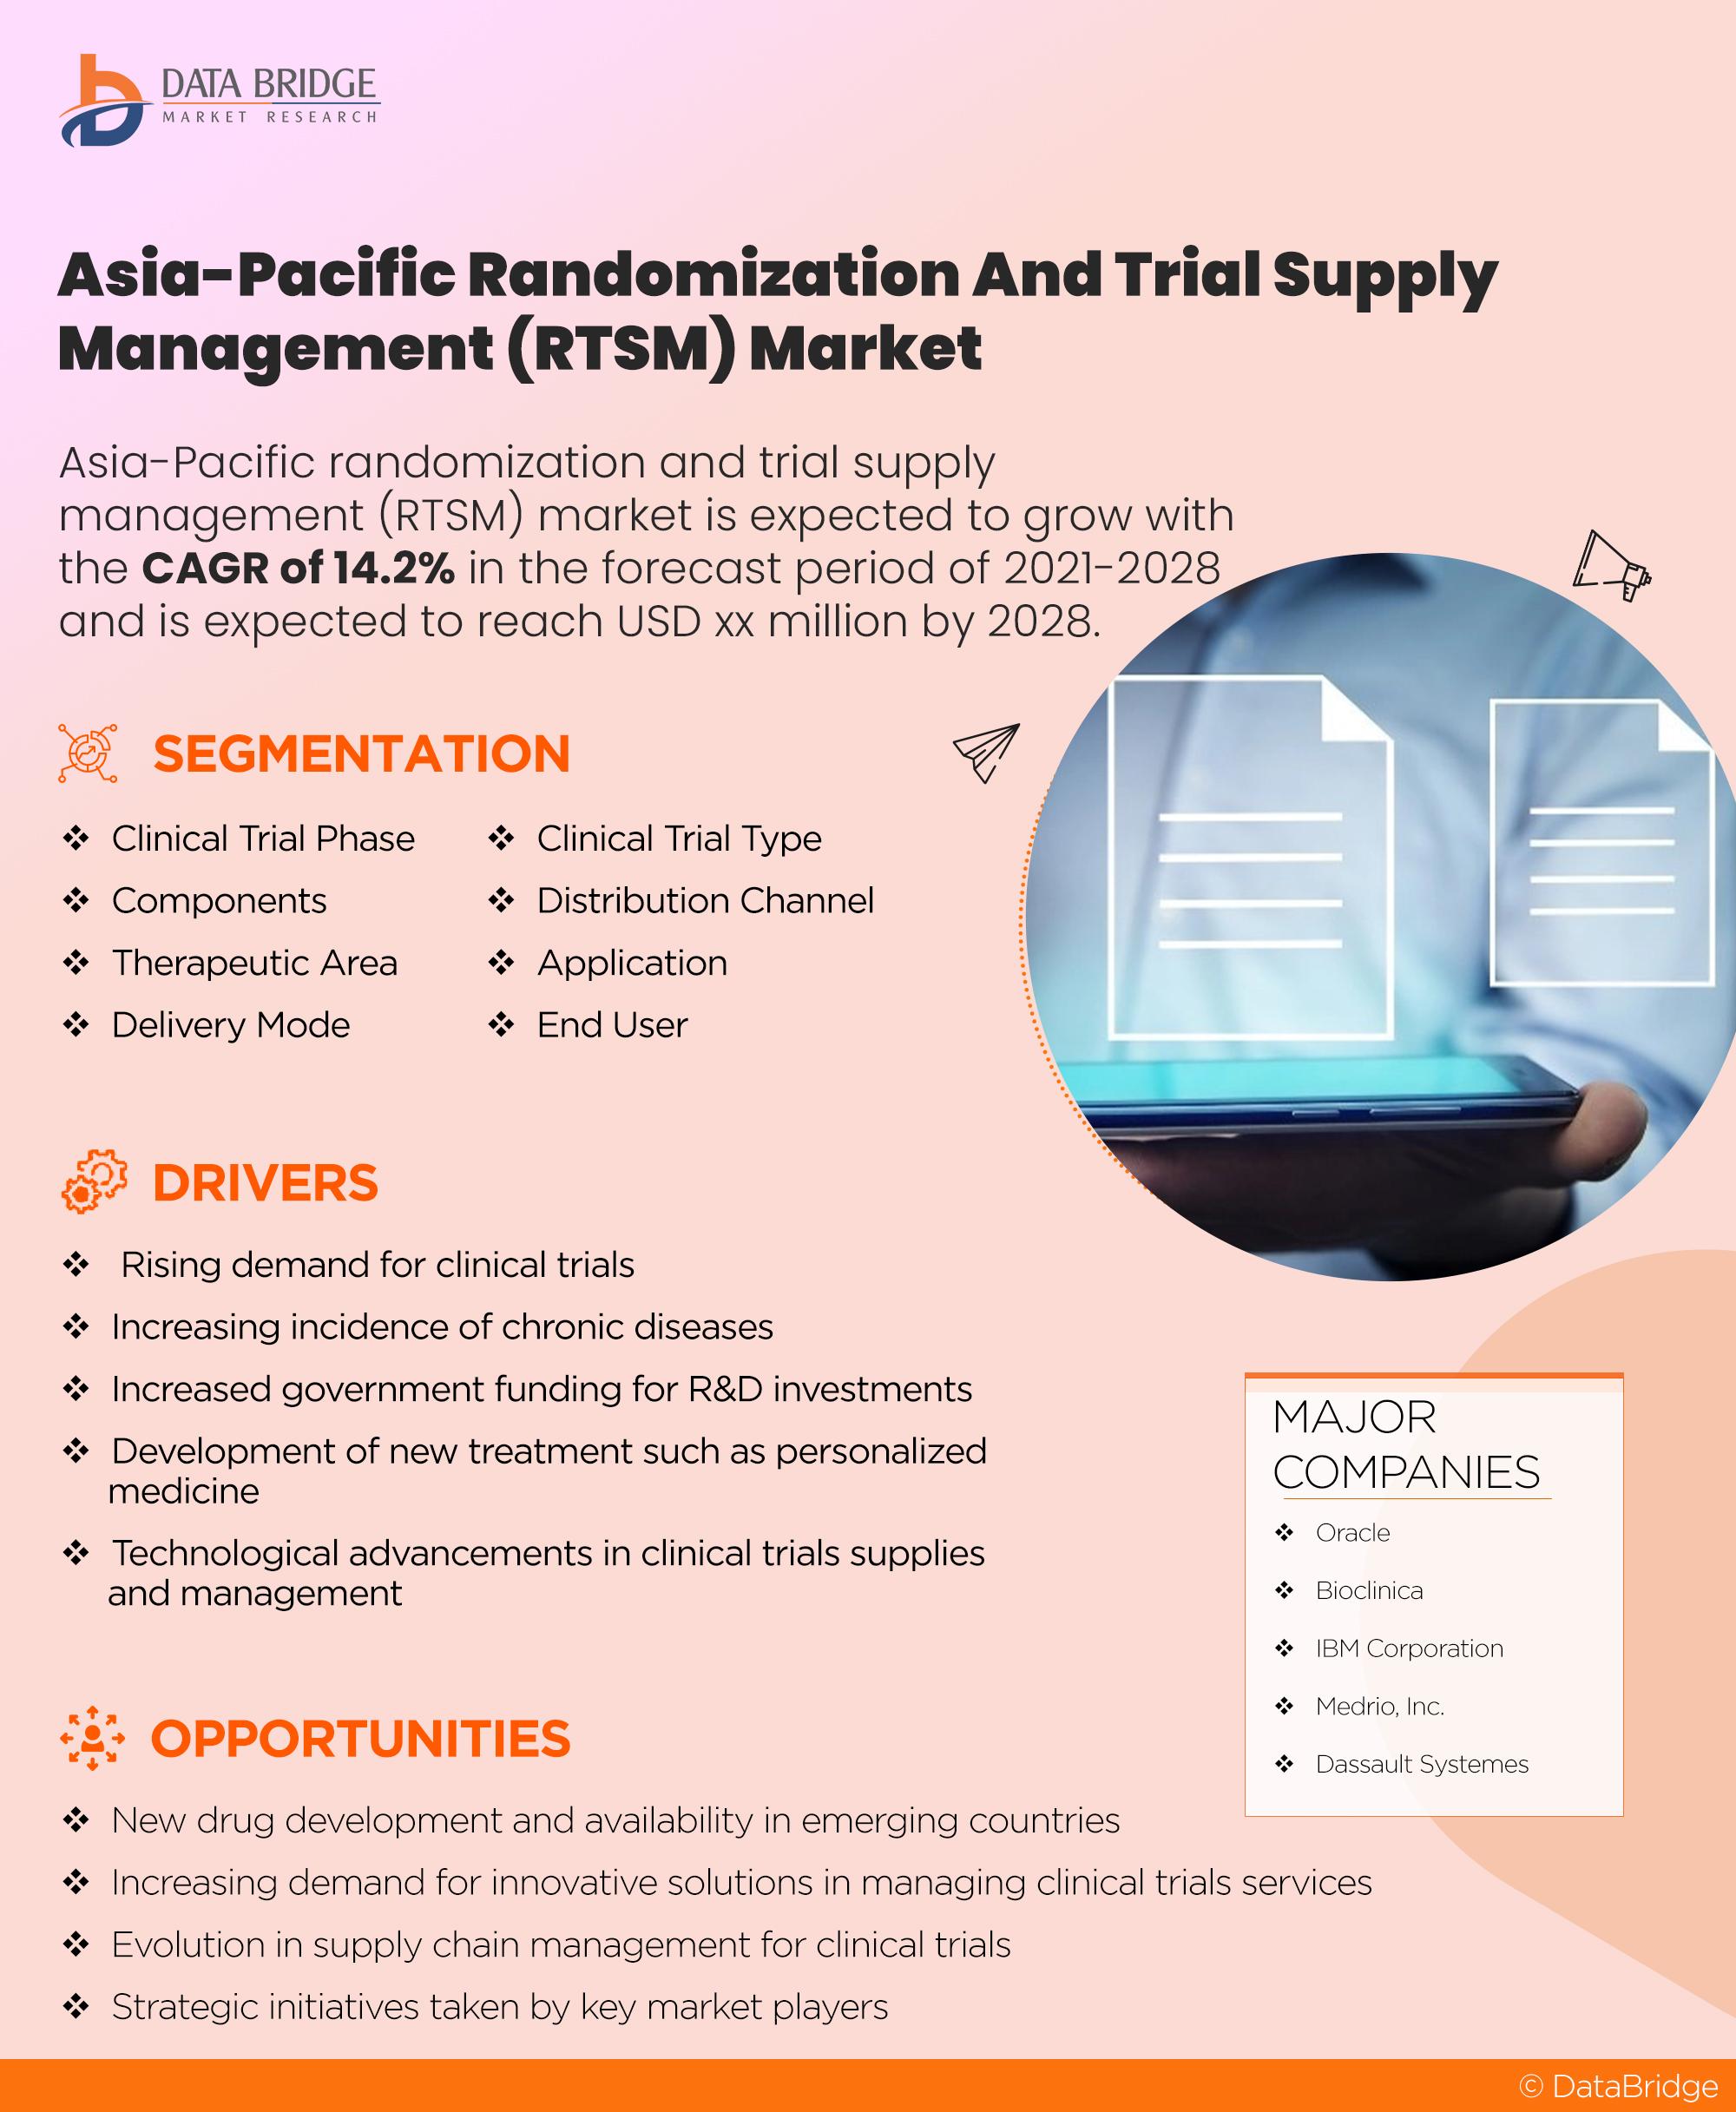 Asia-Pacific Randomization and Trial Supply Management (RTSM) Market